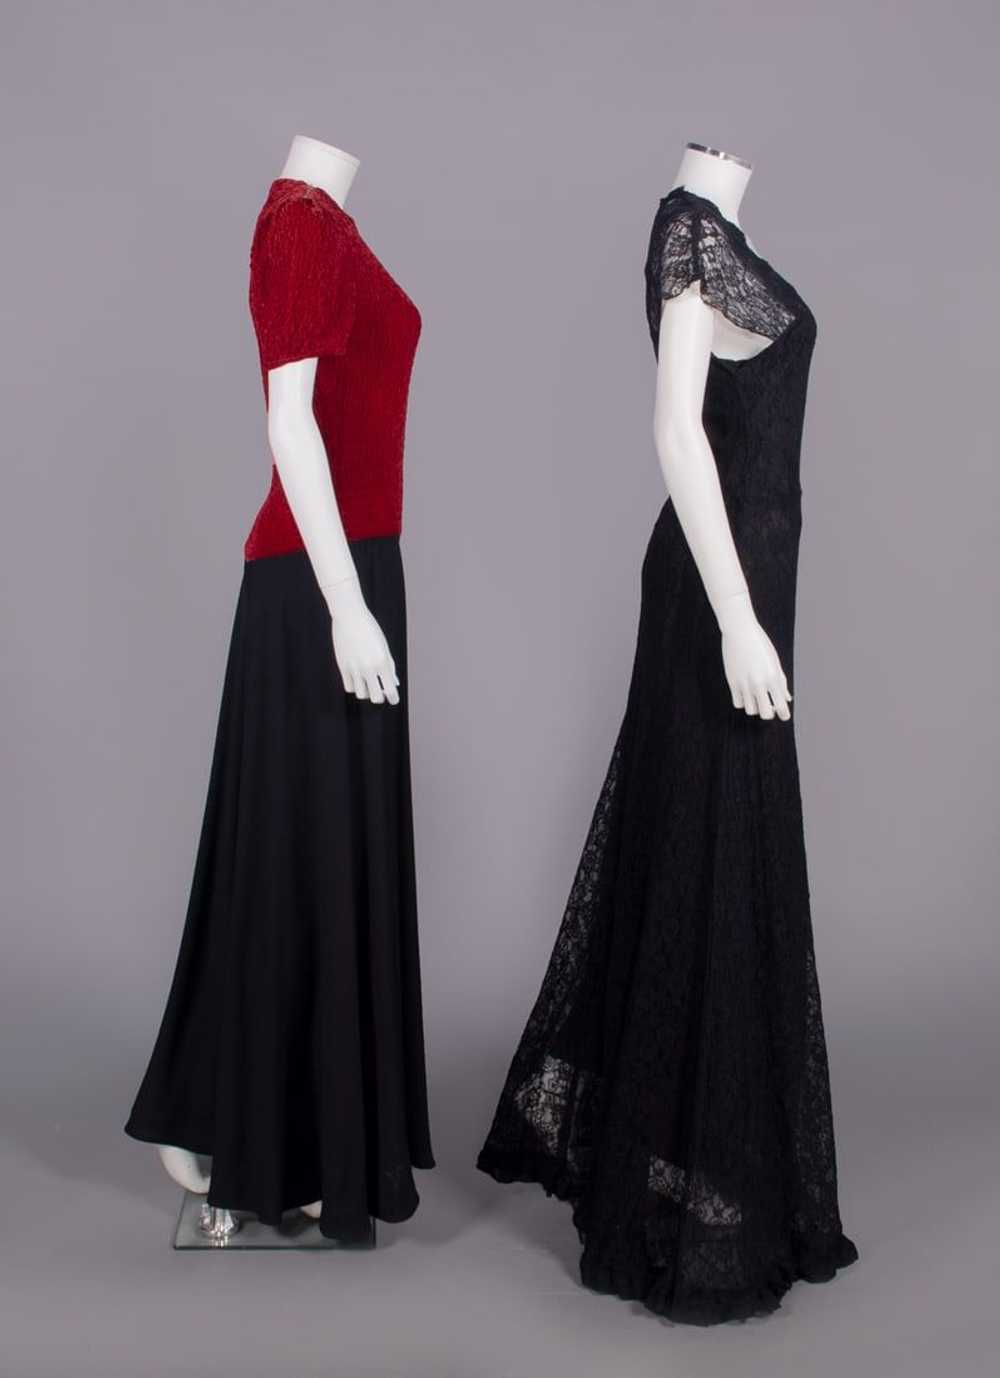 TWO SILK OR LACE EVENING GOWNS, LATE 1930s - image 3